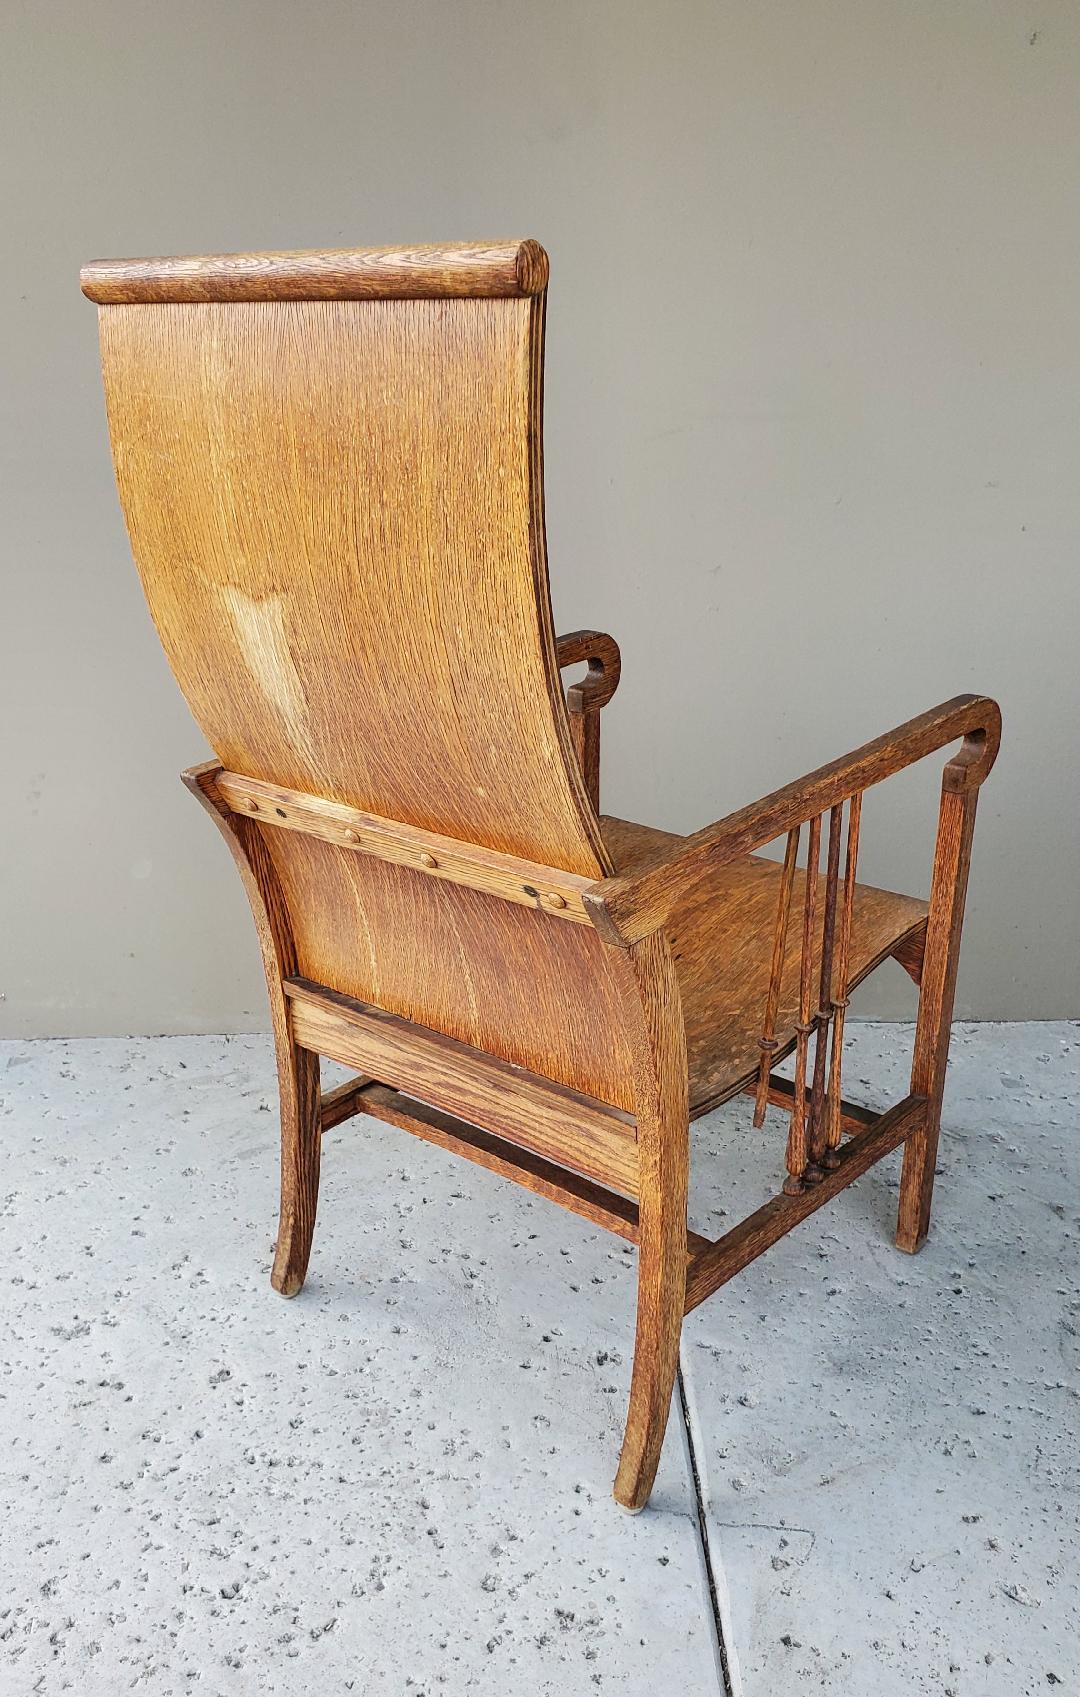 Antique Mission Arts & Crafts Craftsman Quarter Sawn Oak Tall Back Resting Chair In Distressed Condition For Sale In Monrovia, CA